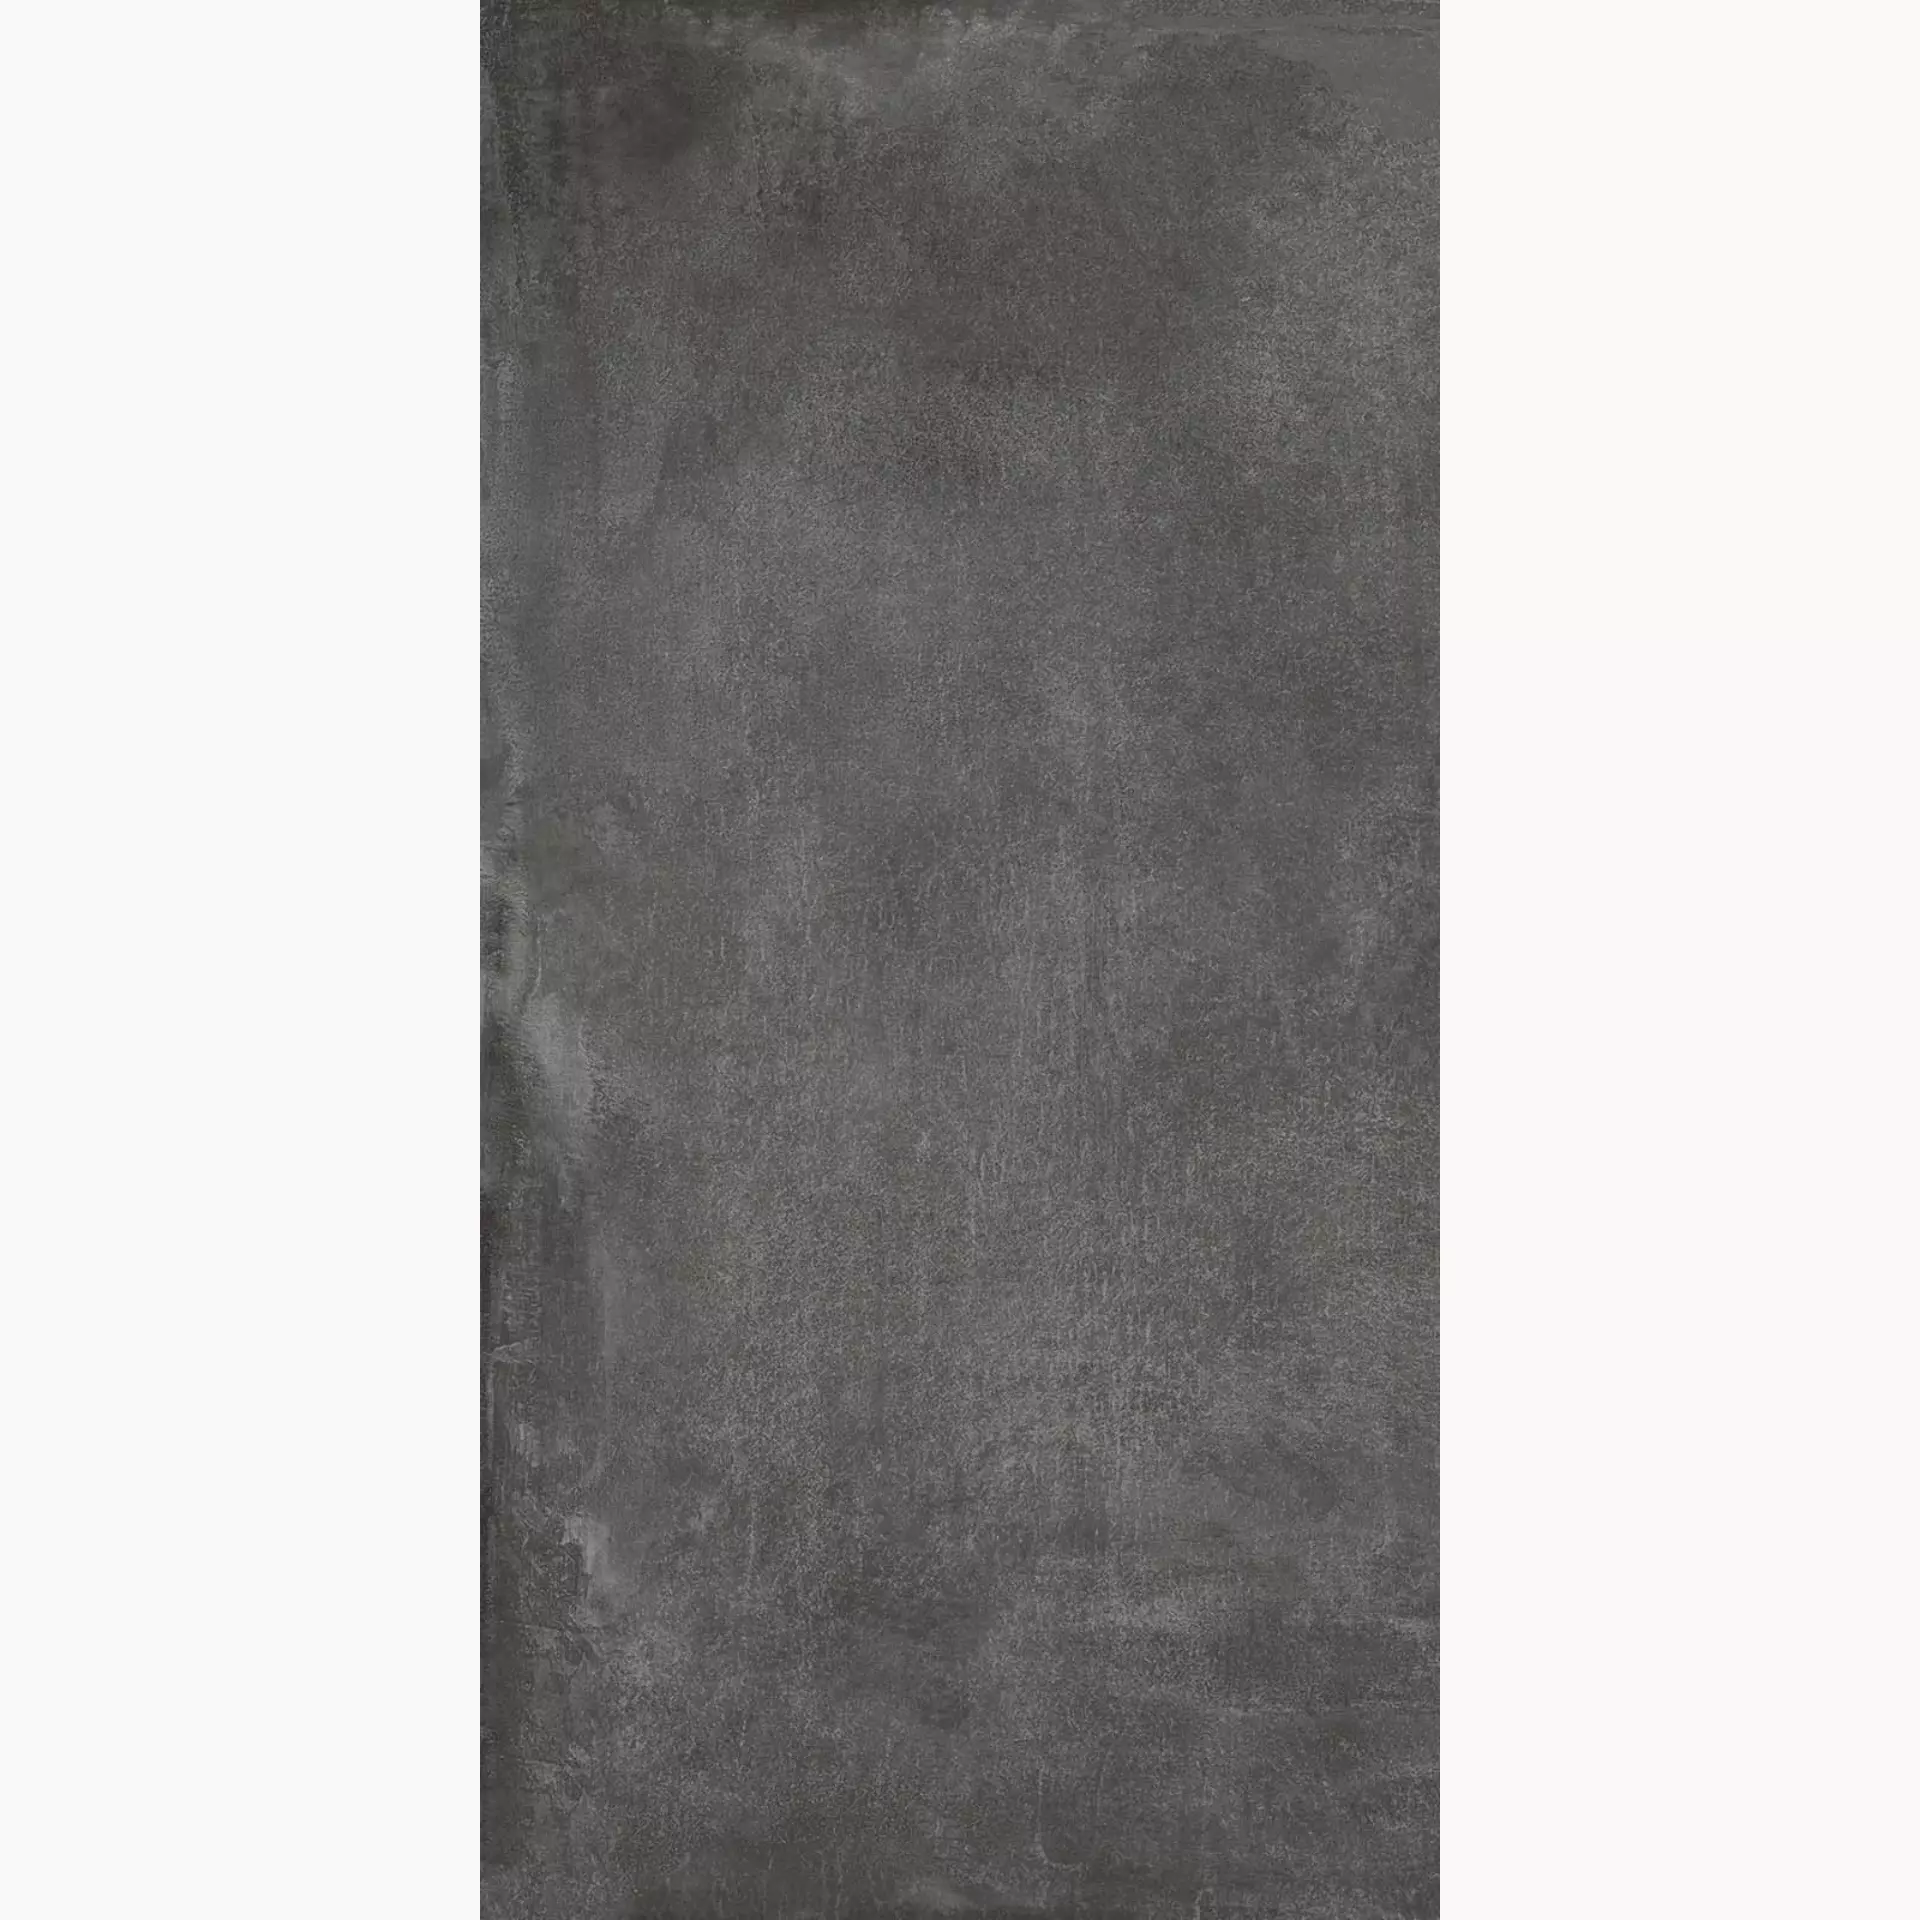 Keope Noord Anthracite Naturale – Matt 45444434 60x120cm rectified 9mm